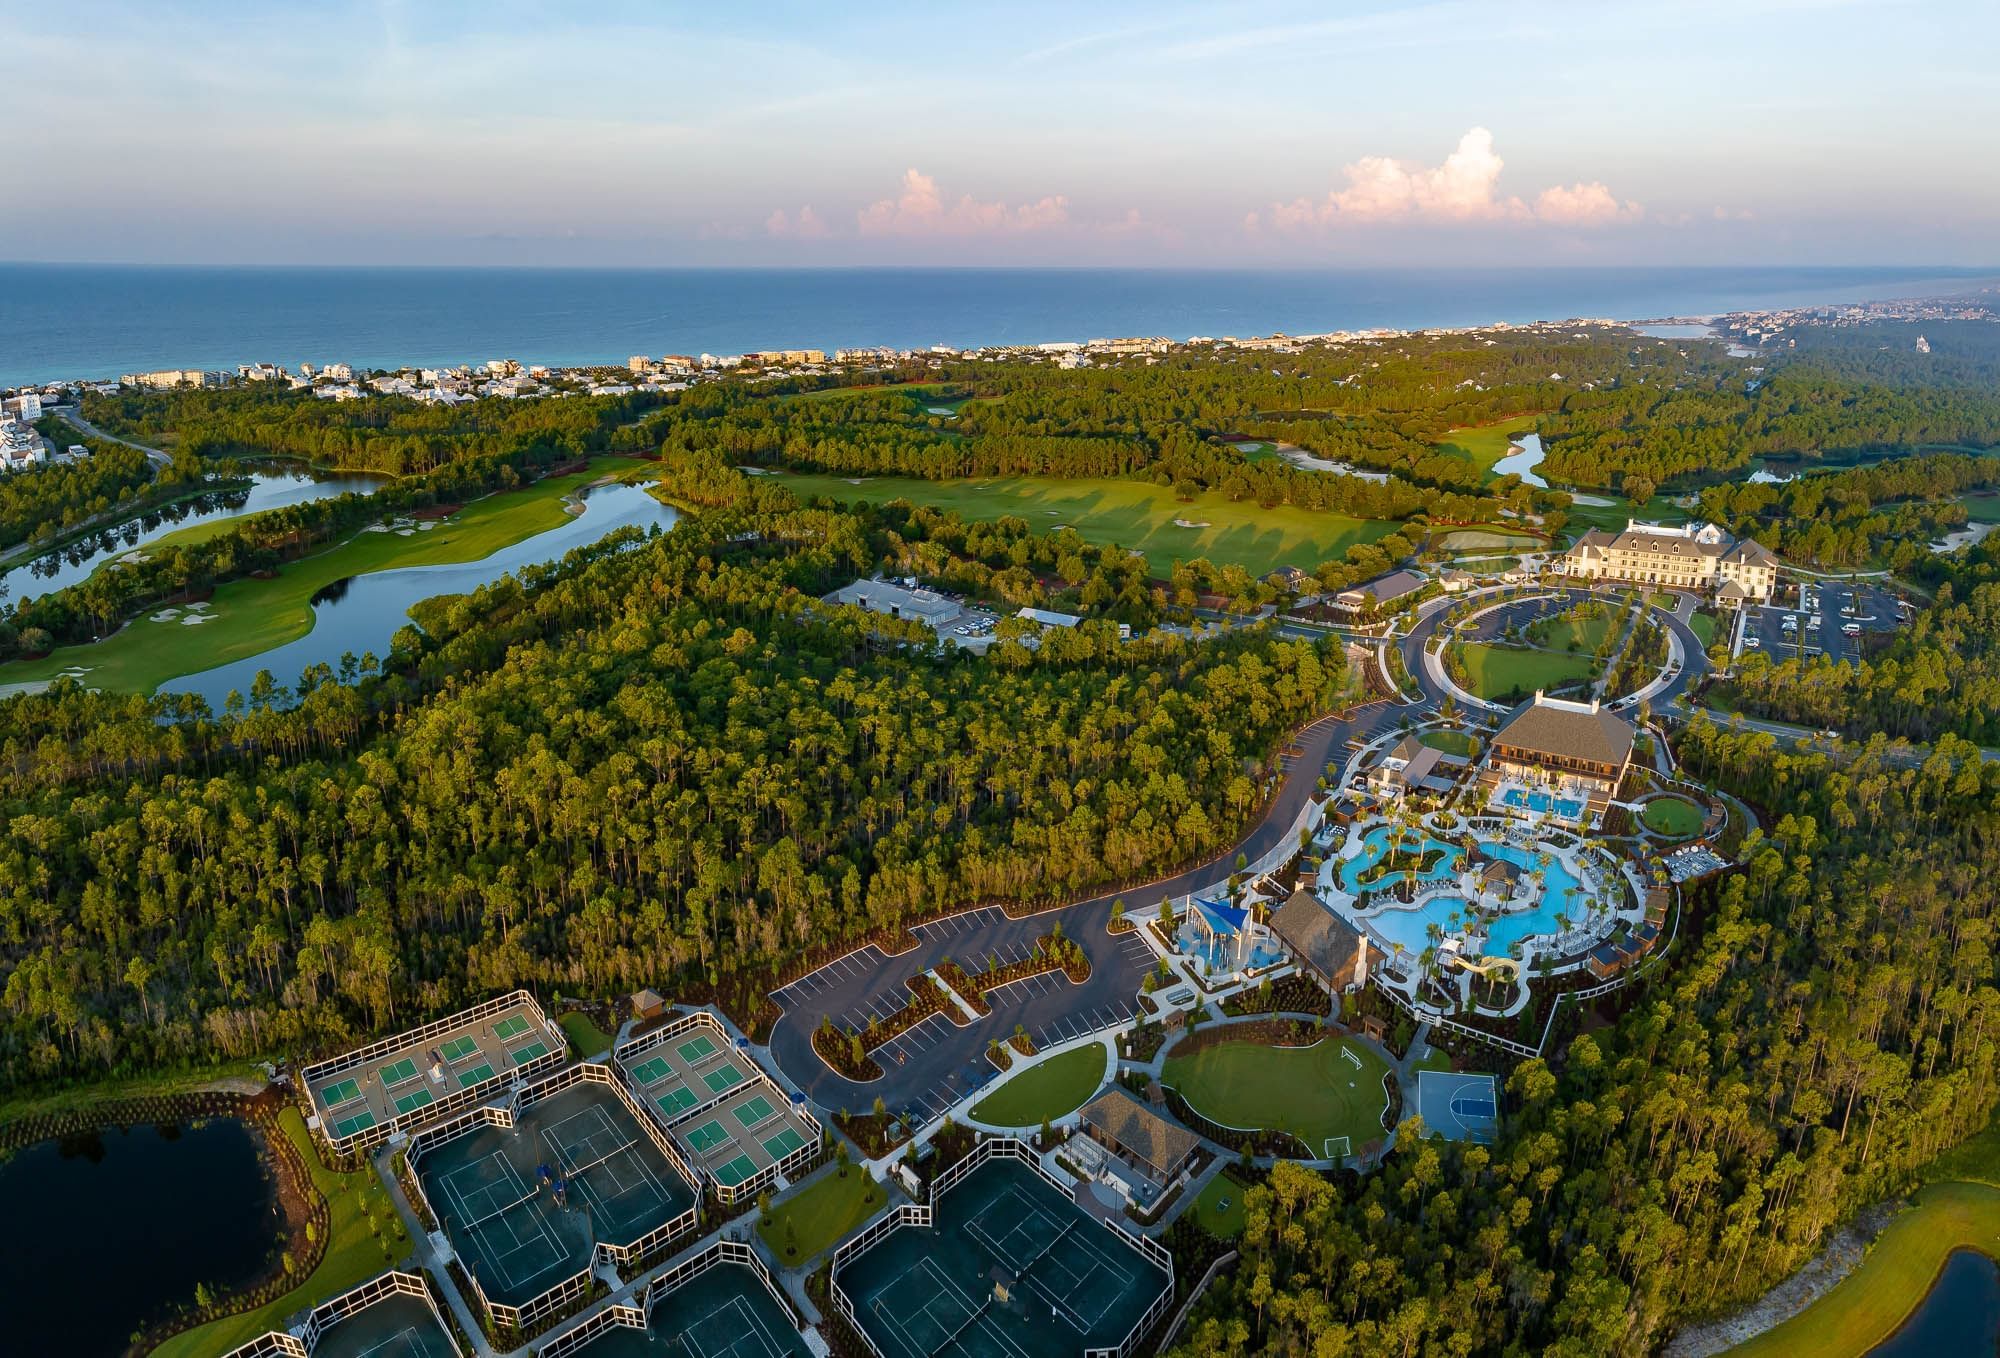 Aerial view of Camp Creek Inn, Golf Course & Amenities in the scenic 30A area of Florida